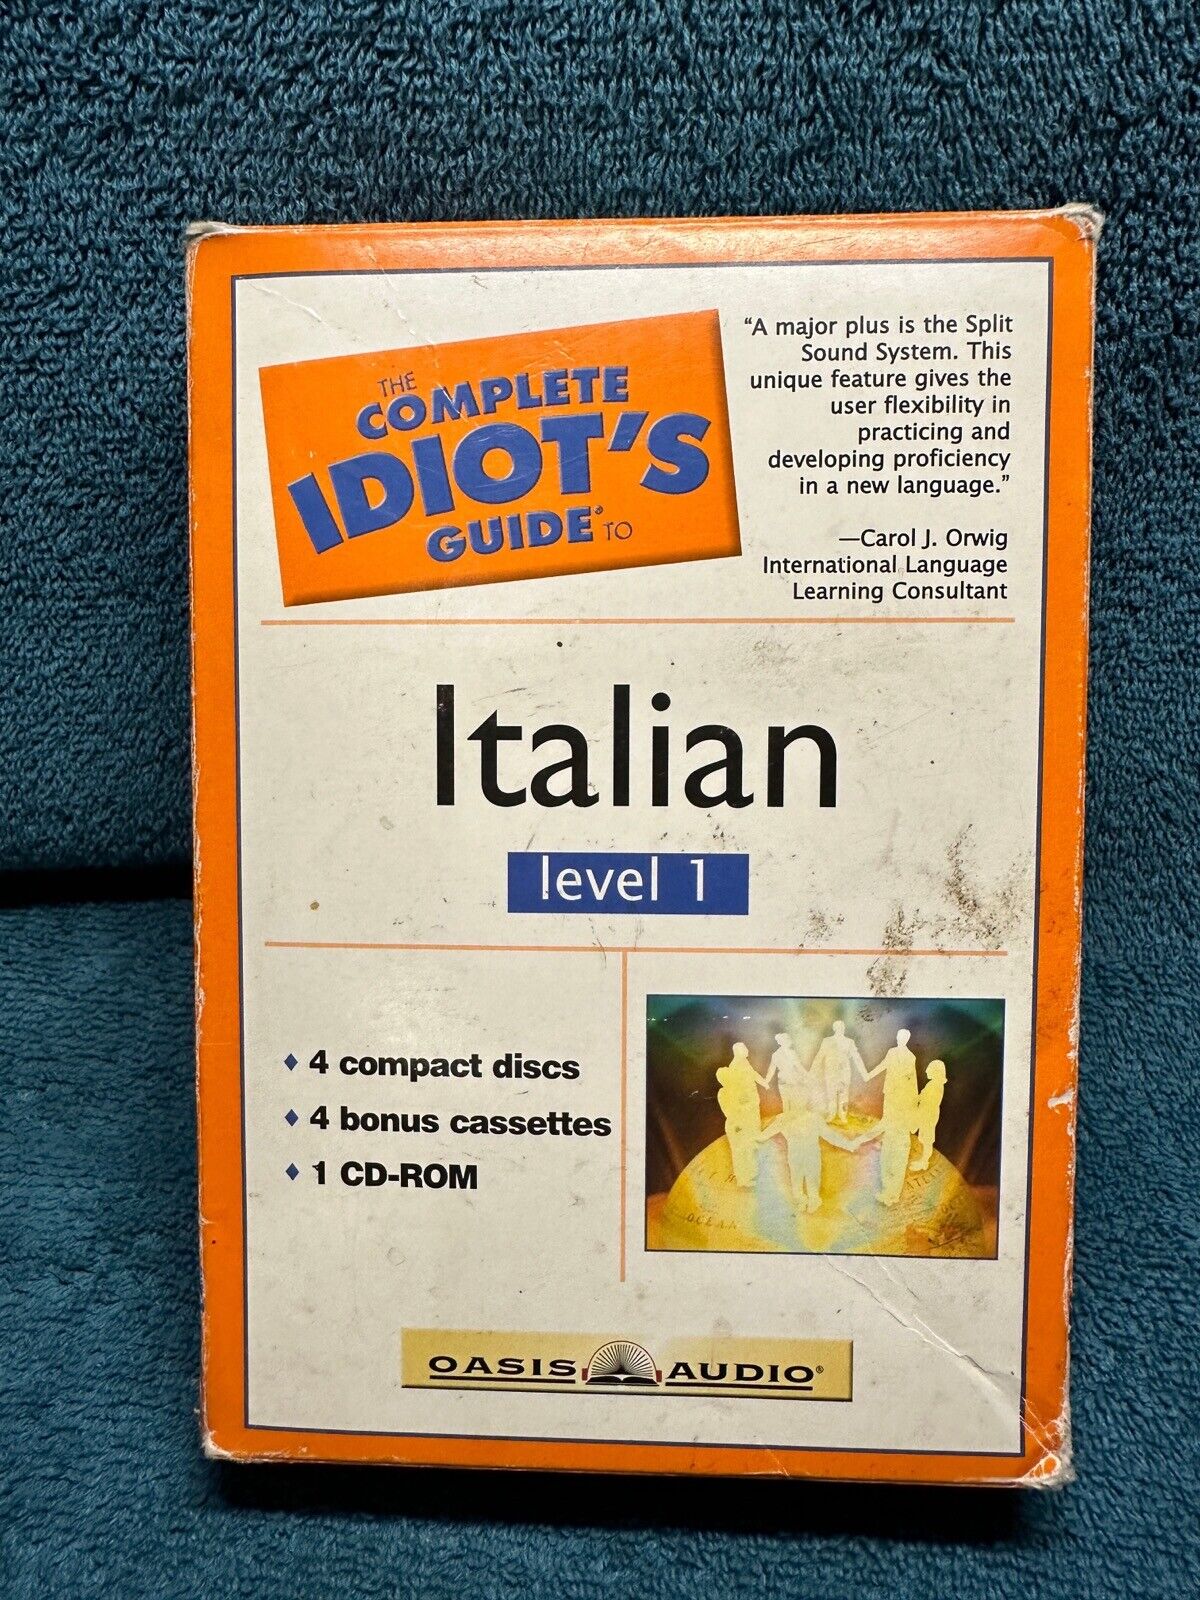 The Complete Idiot's Guide To Italian Level 1 Used 5 Discs 4 Cassettes  Used